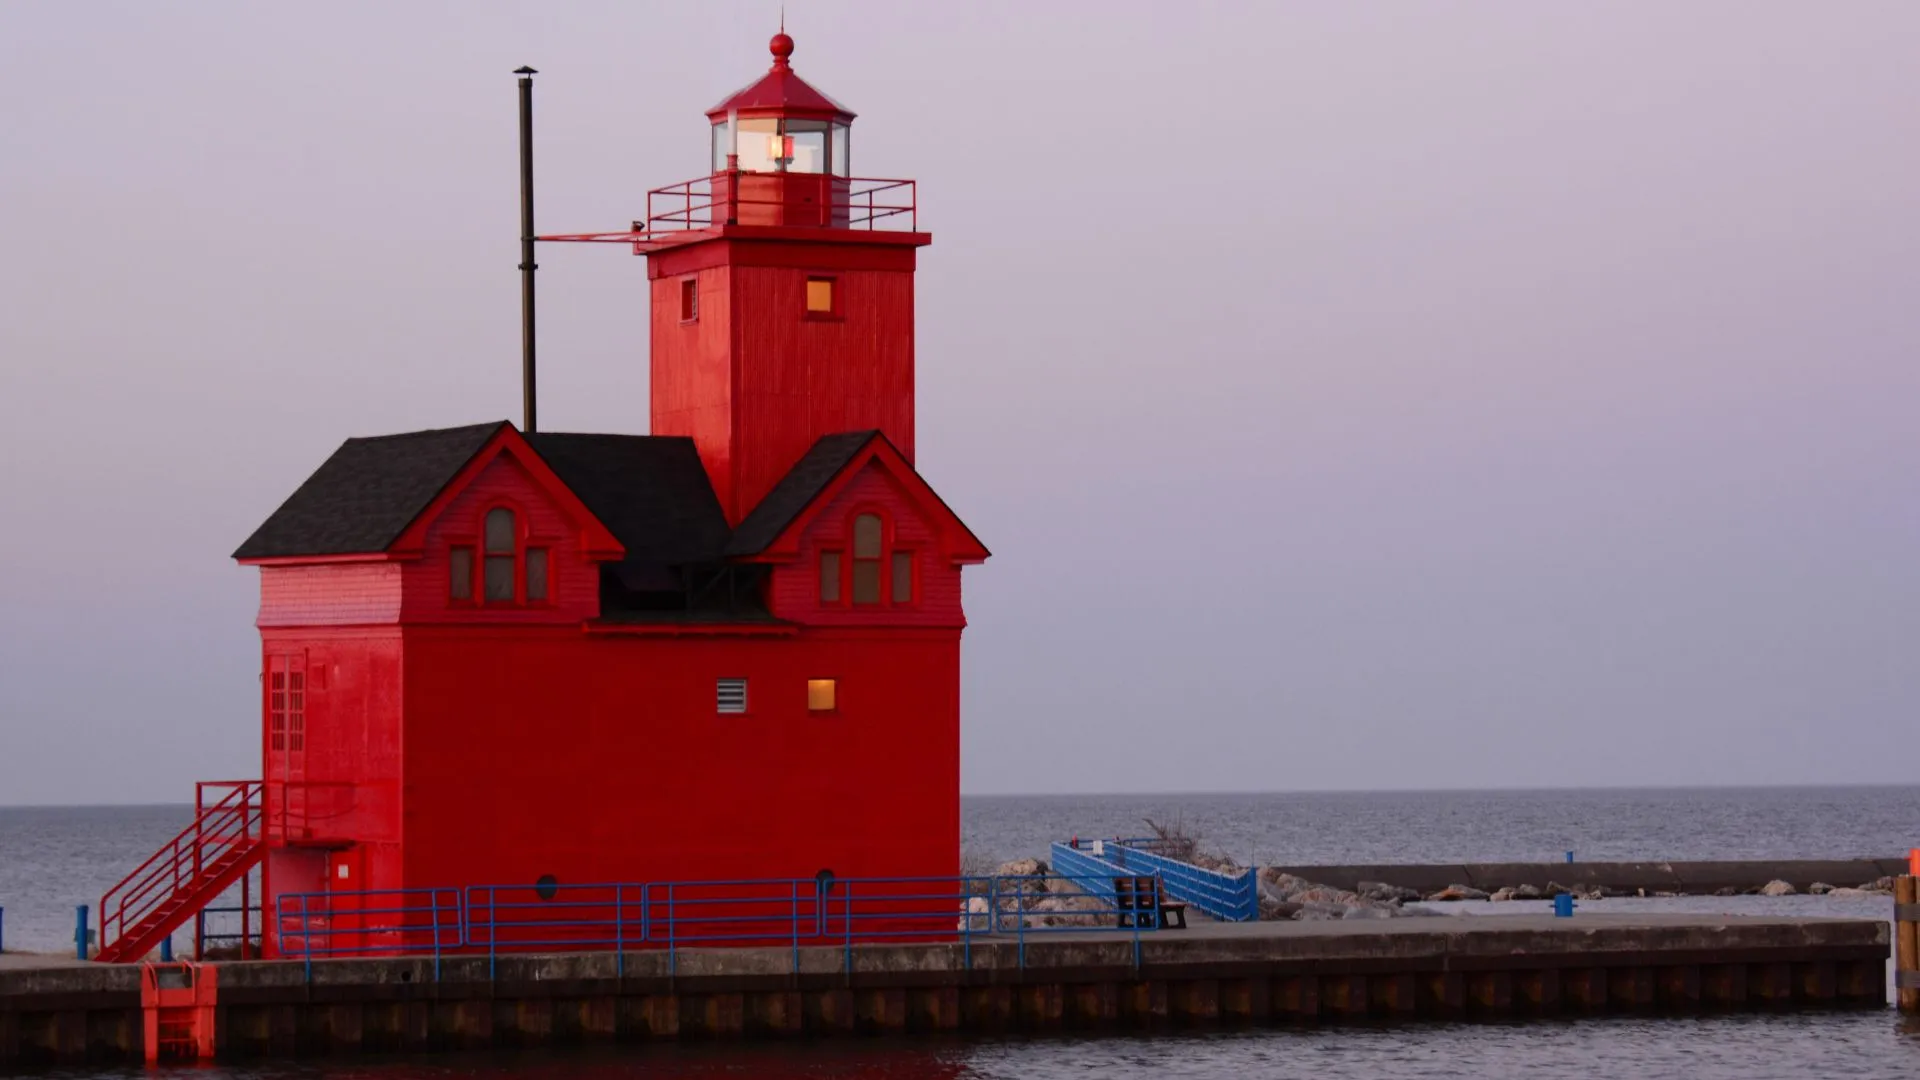 A red dutch-styled light house on a body water